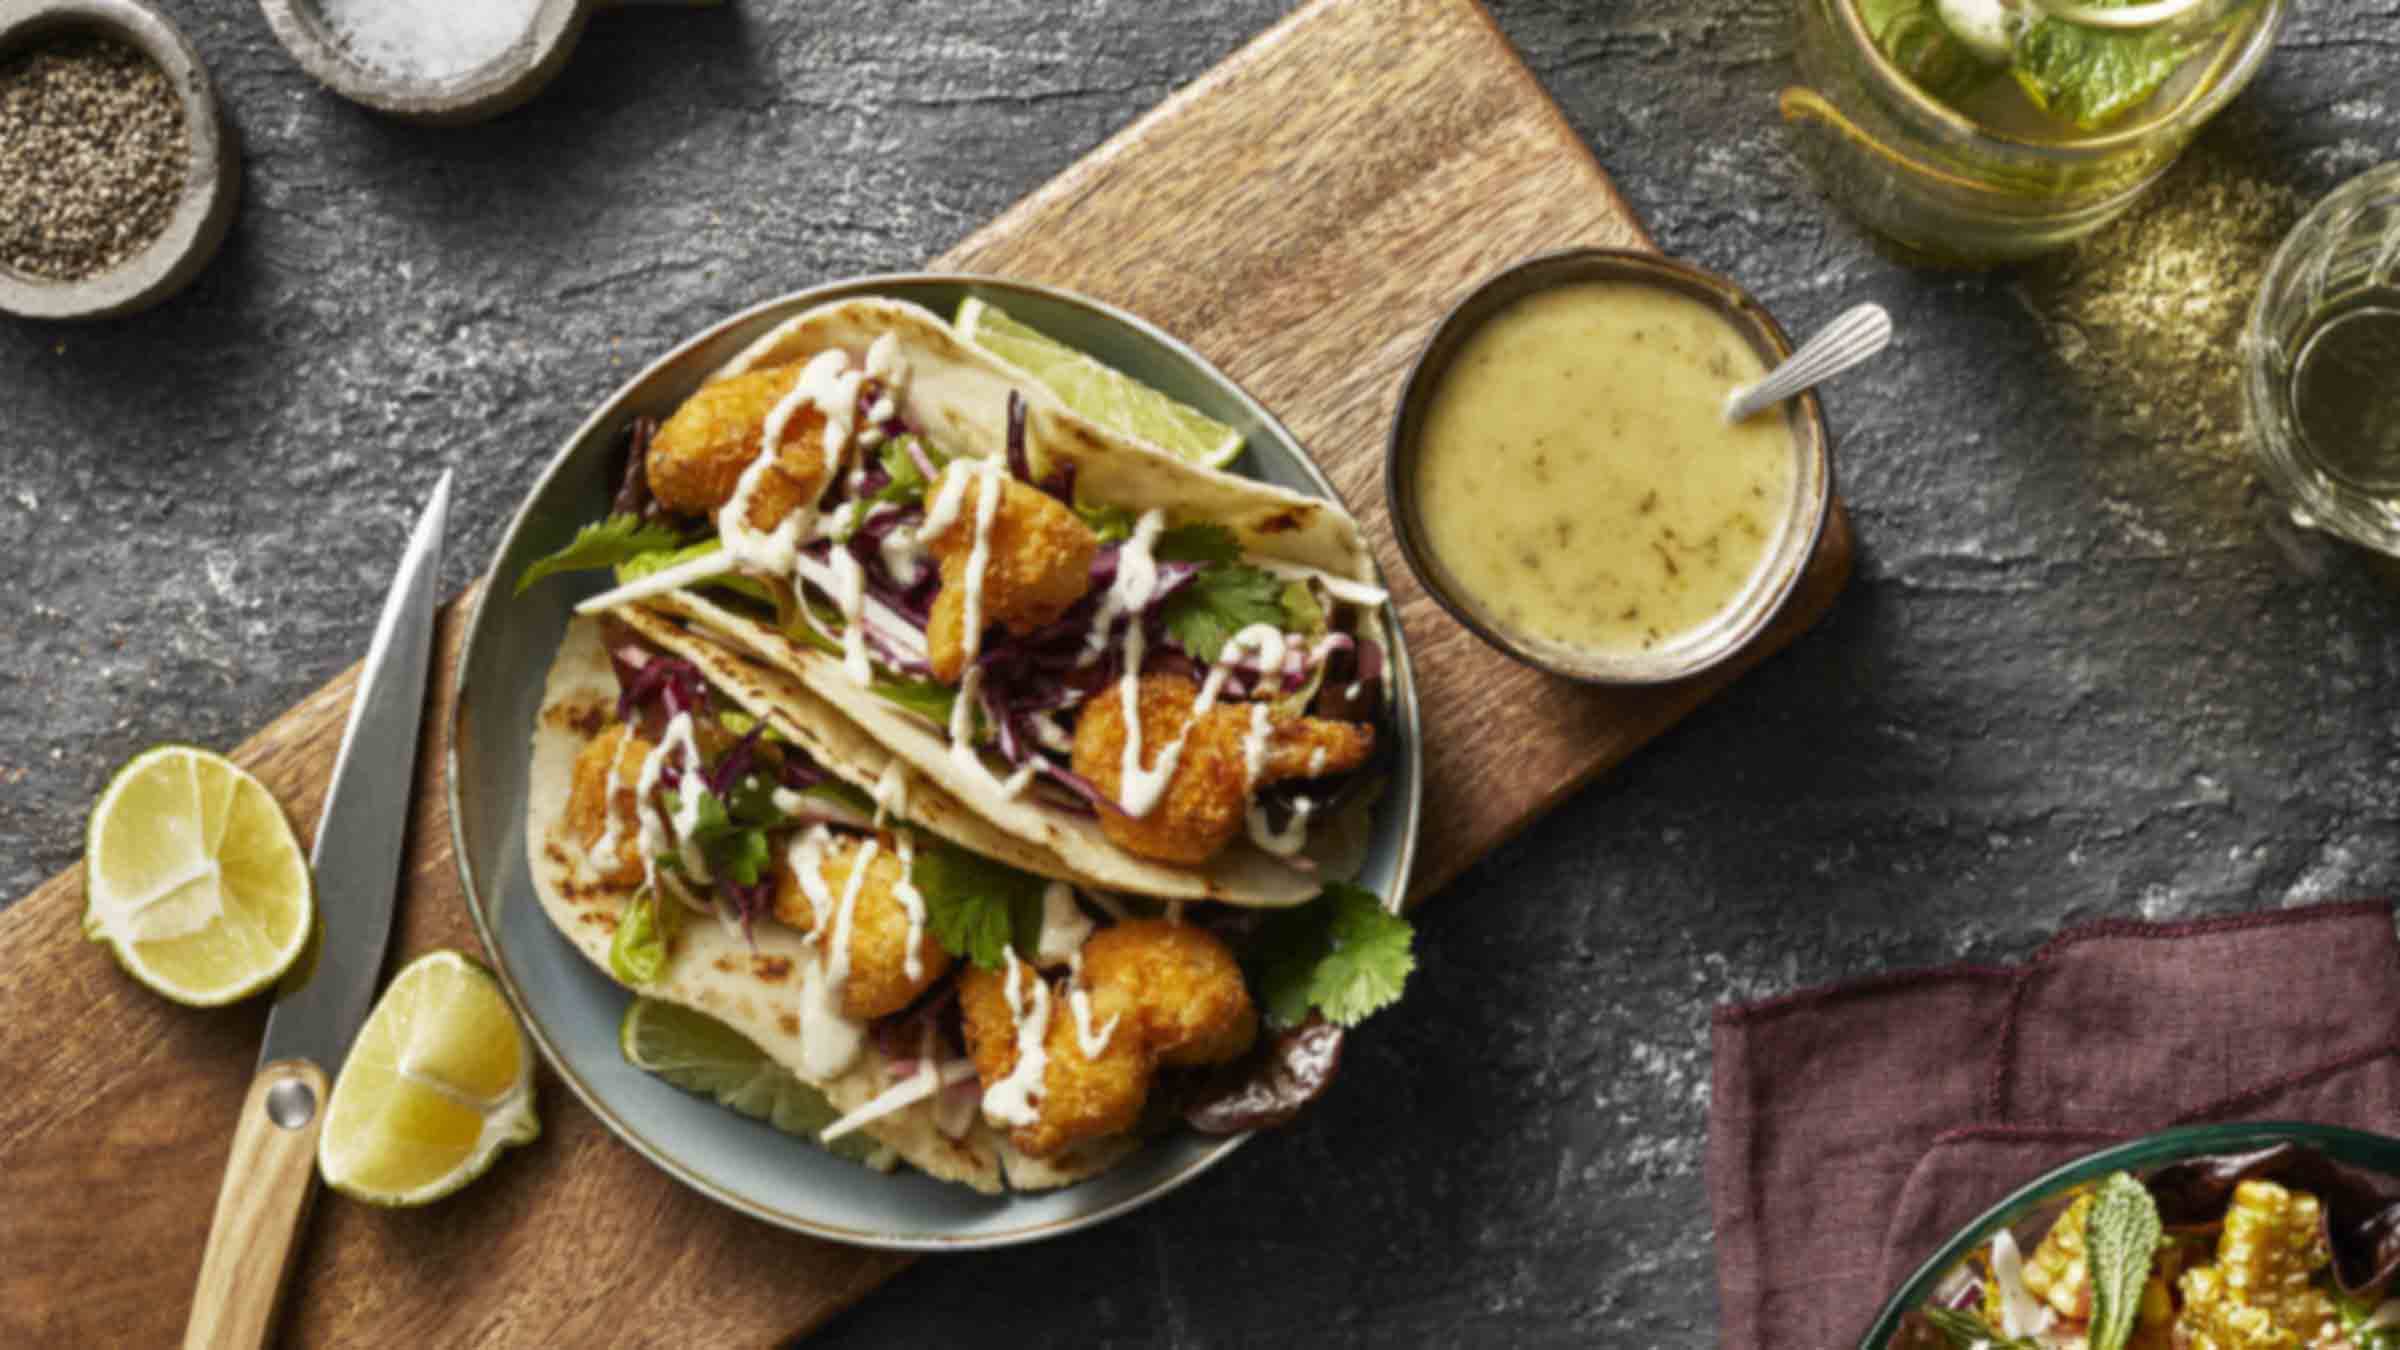 Cauliflower Tacos with Spicy Chile Drizzle